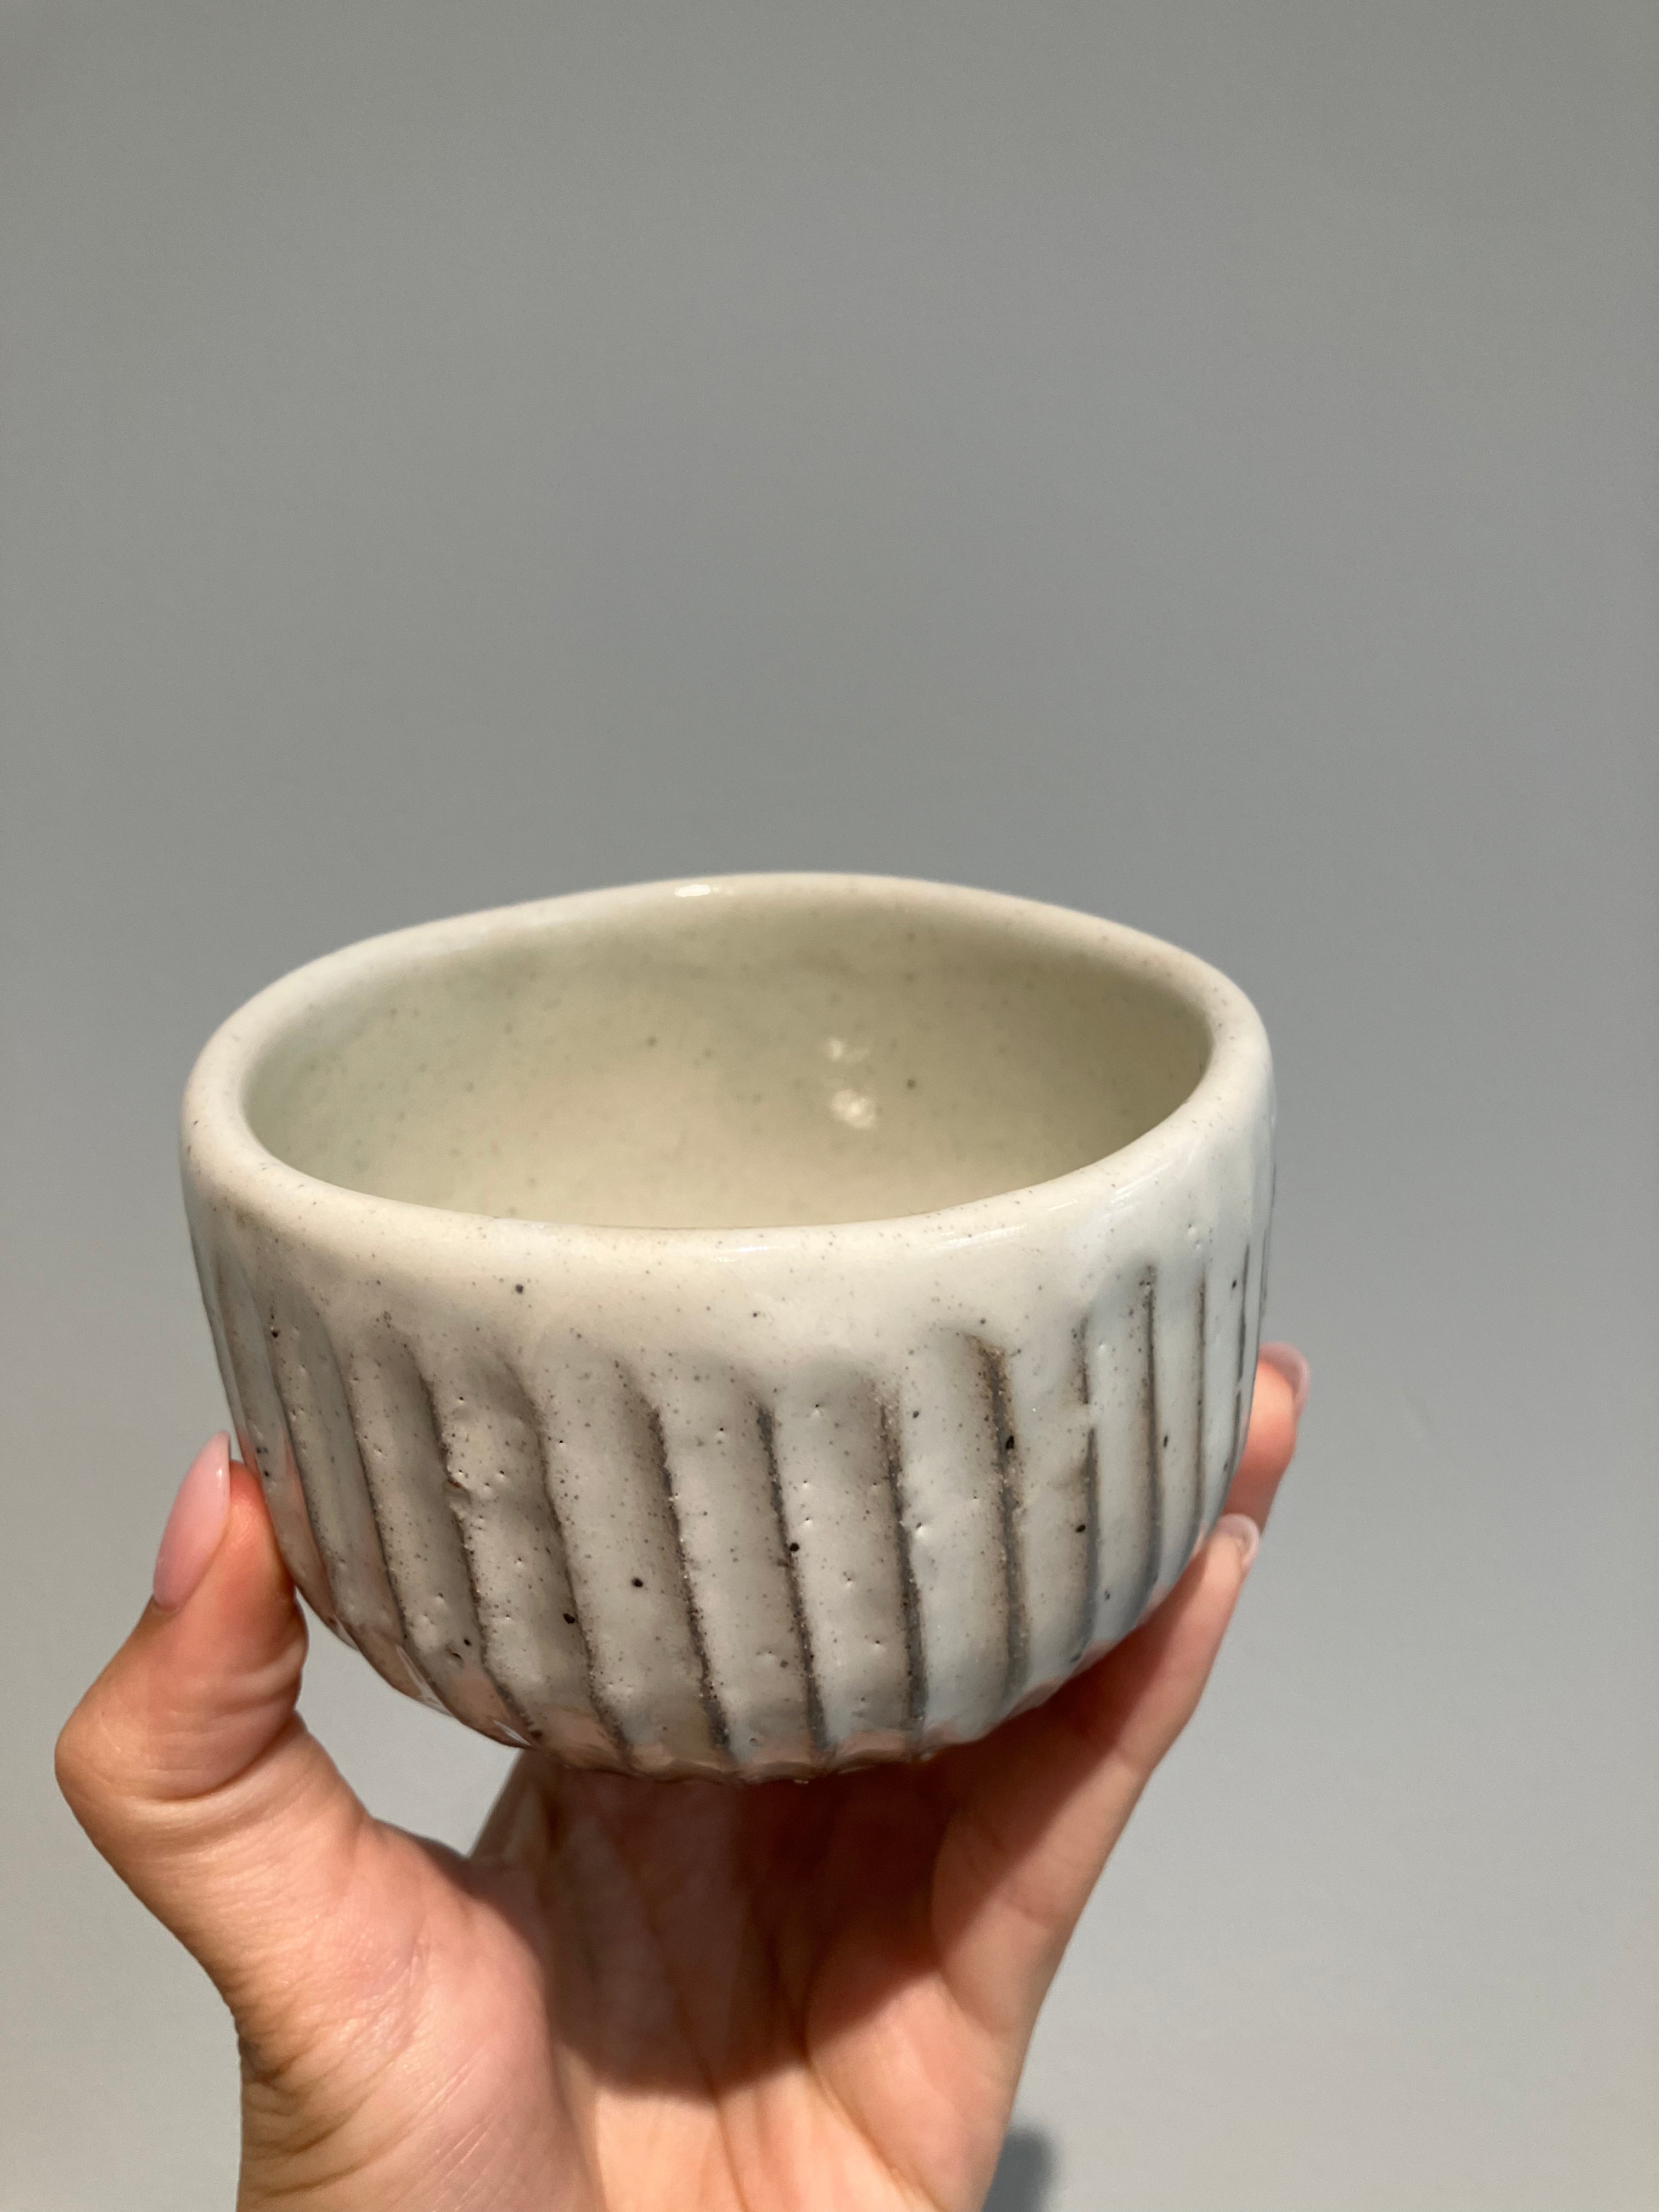 Small white matcha cup with stripes